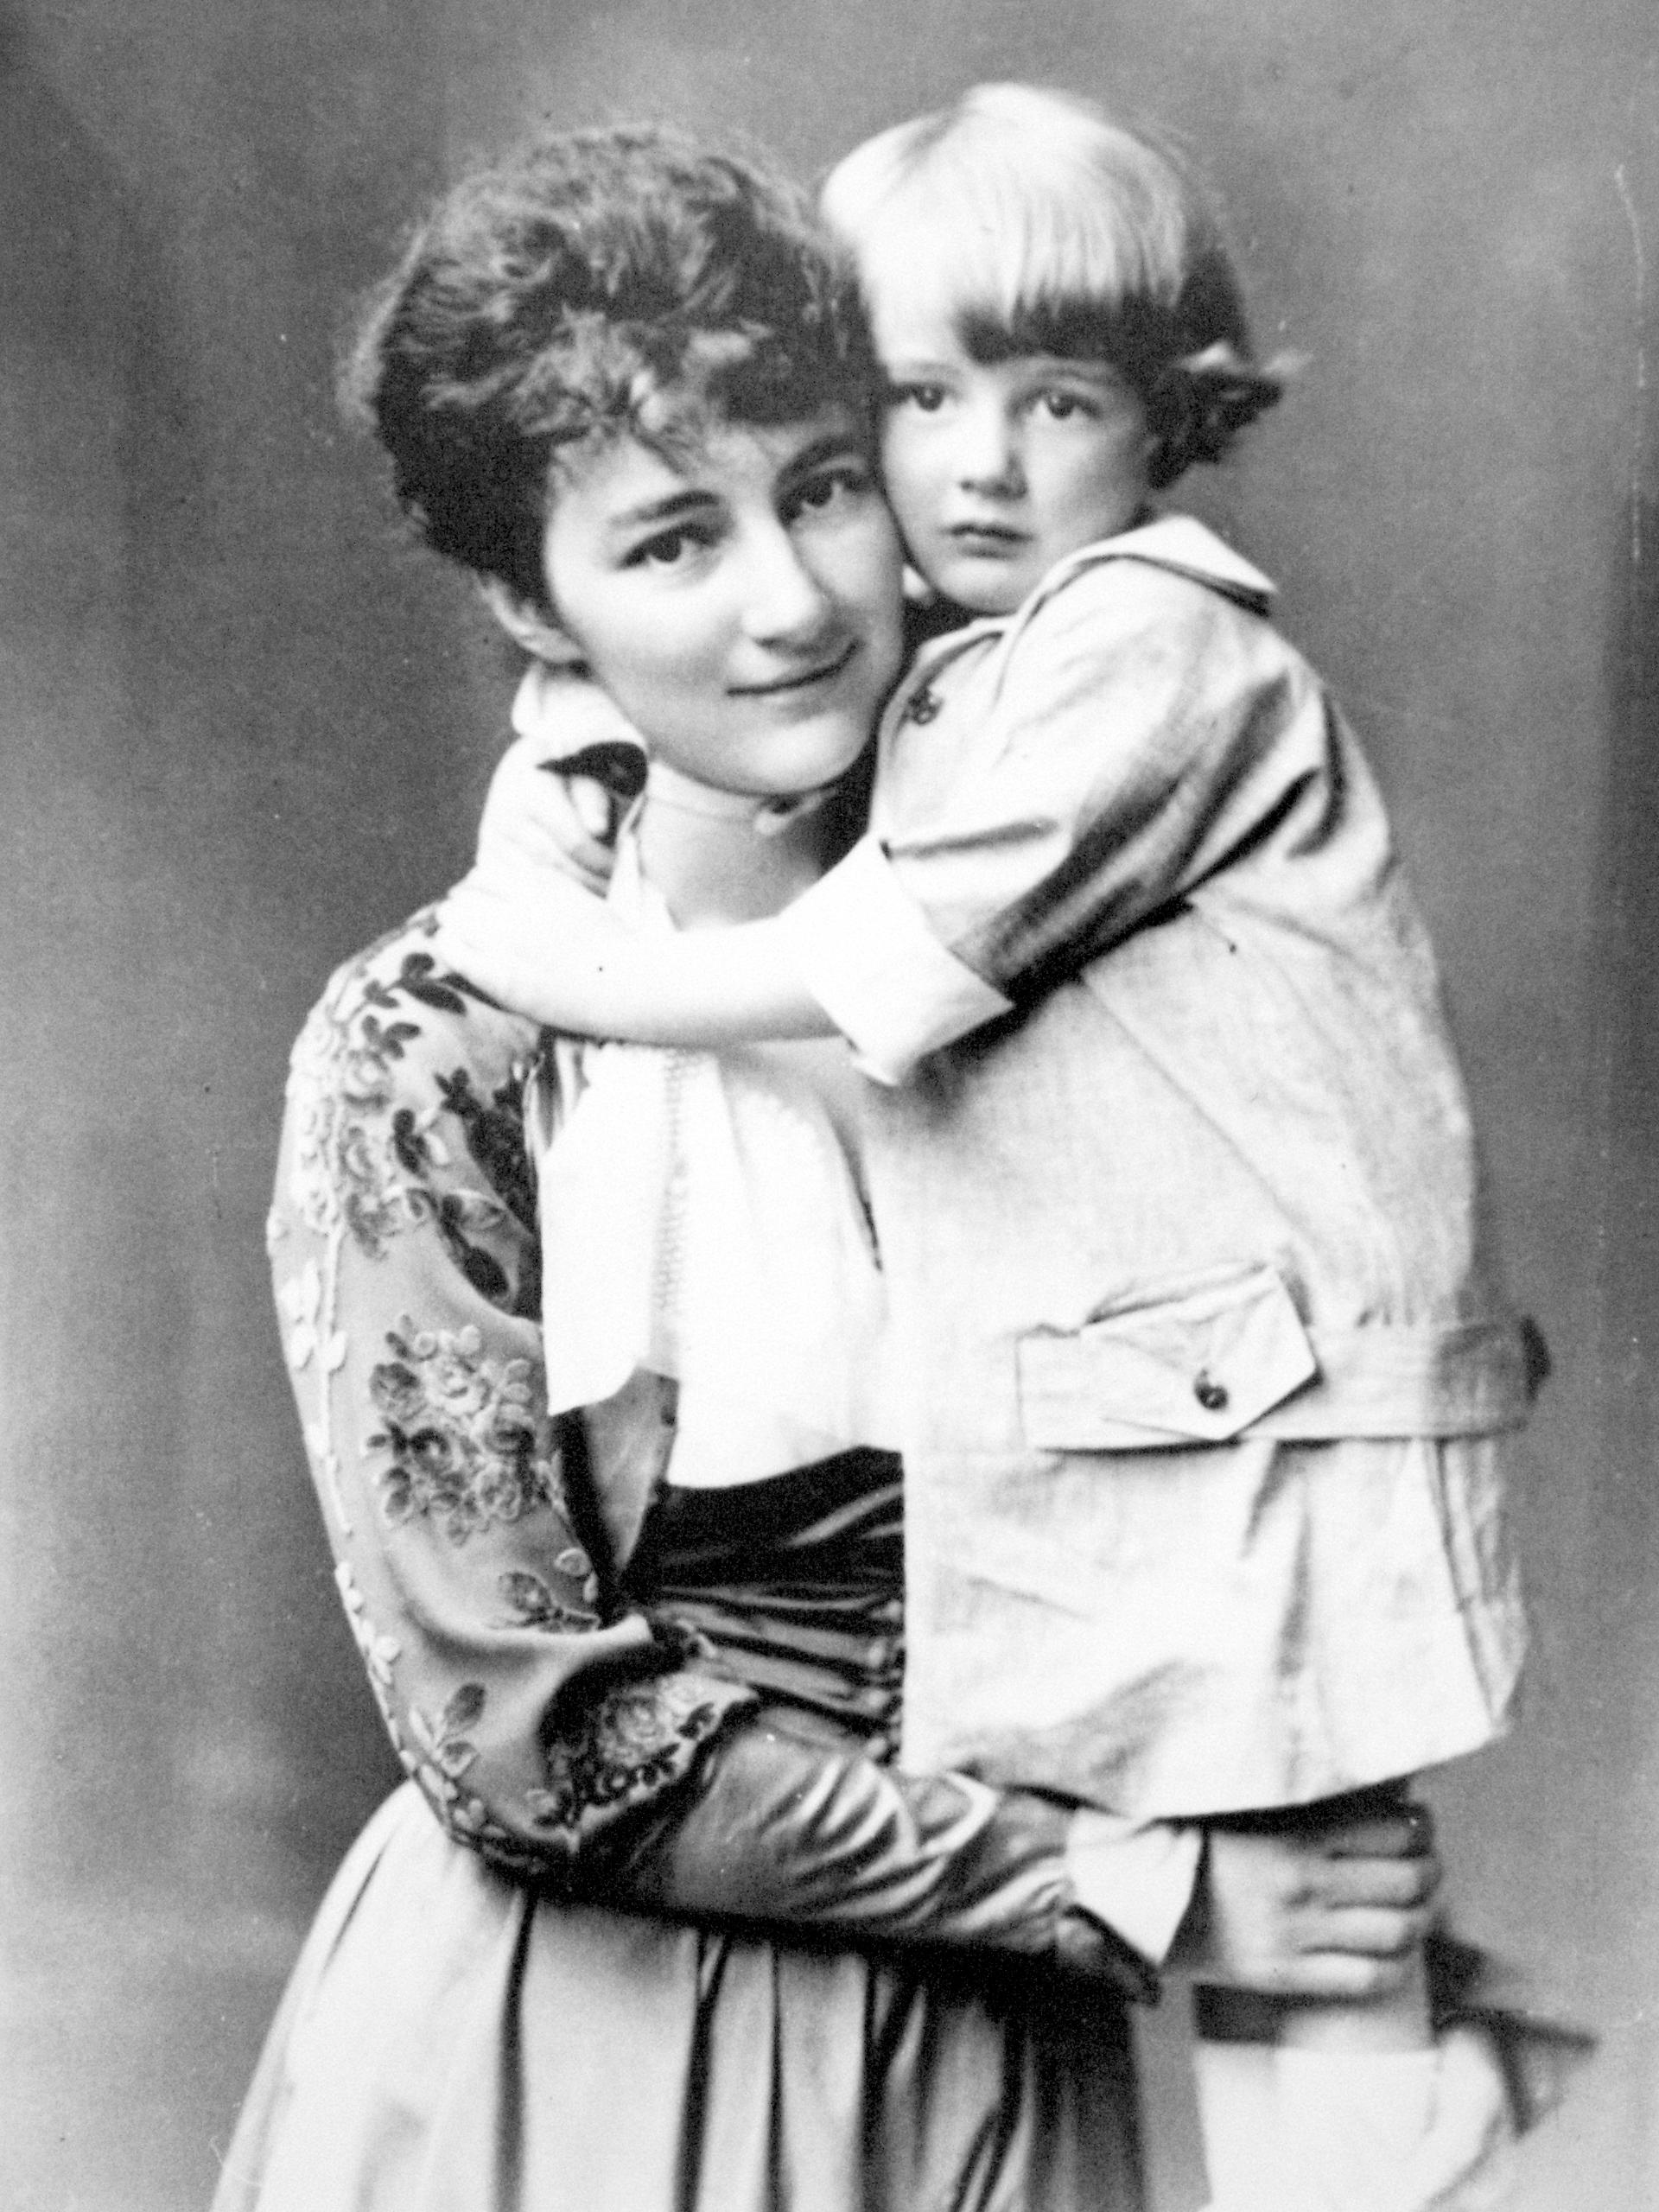 Black-and-white photo of Raoul Wallenberg as a child with his mother.